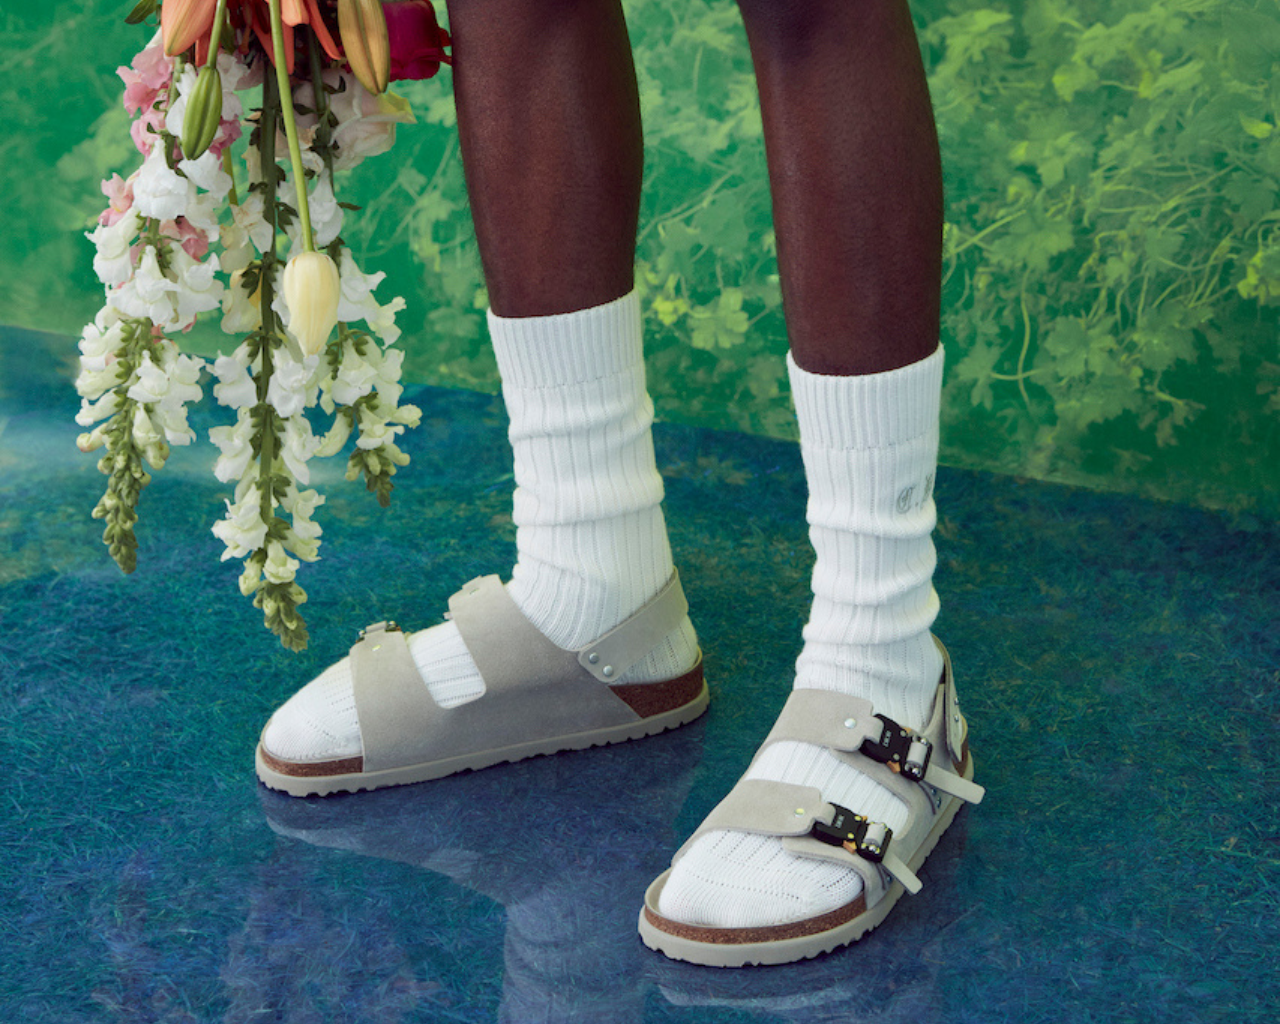 Dior x Birkenstock: The Inspiring Story Behind the Collaboration